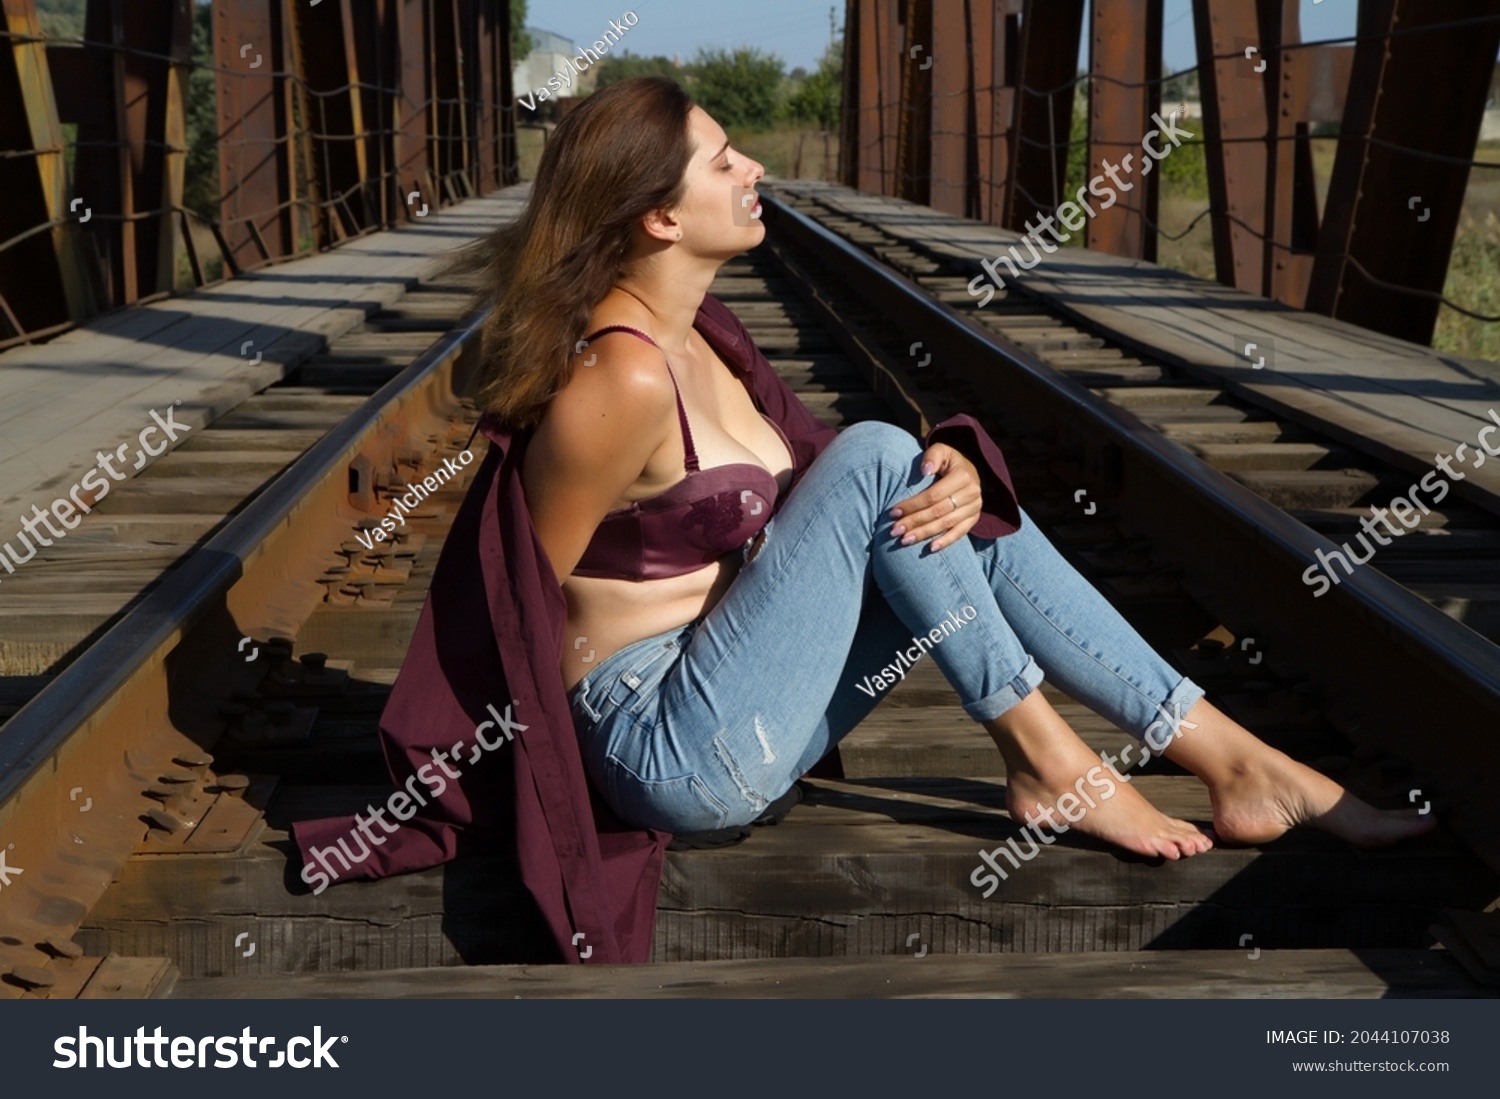 https://image.shutterstock.com/shutterstock/photos/2044107038/display_1500/stock-photo-the-girl-sits-on-the-railway-sleepers-and-looks-into-the-distance-2044107038.jpg